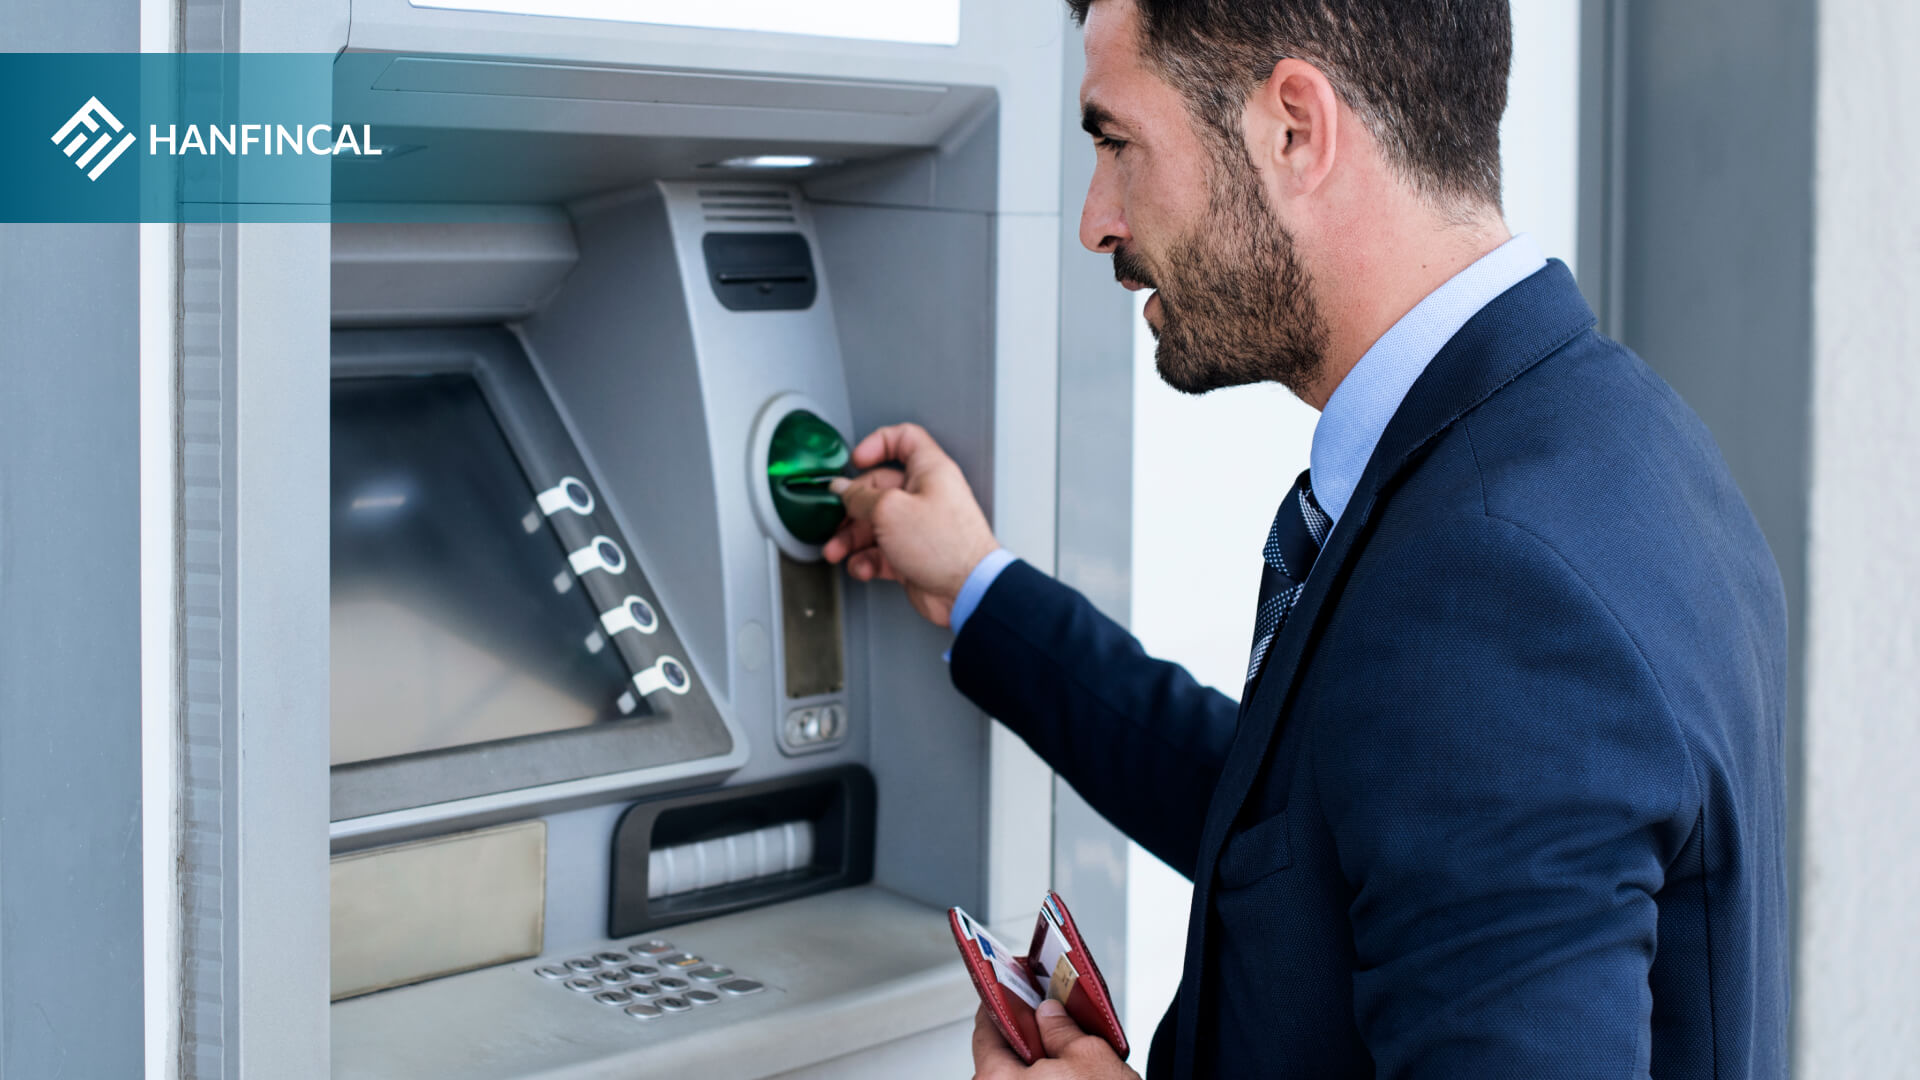 Can you use a credit card at an ATM?